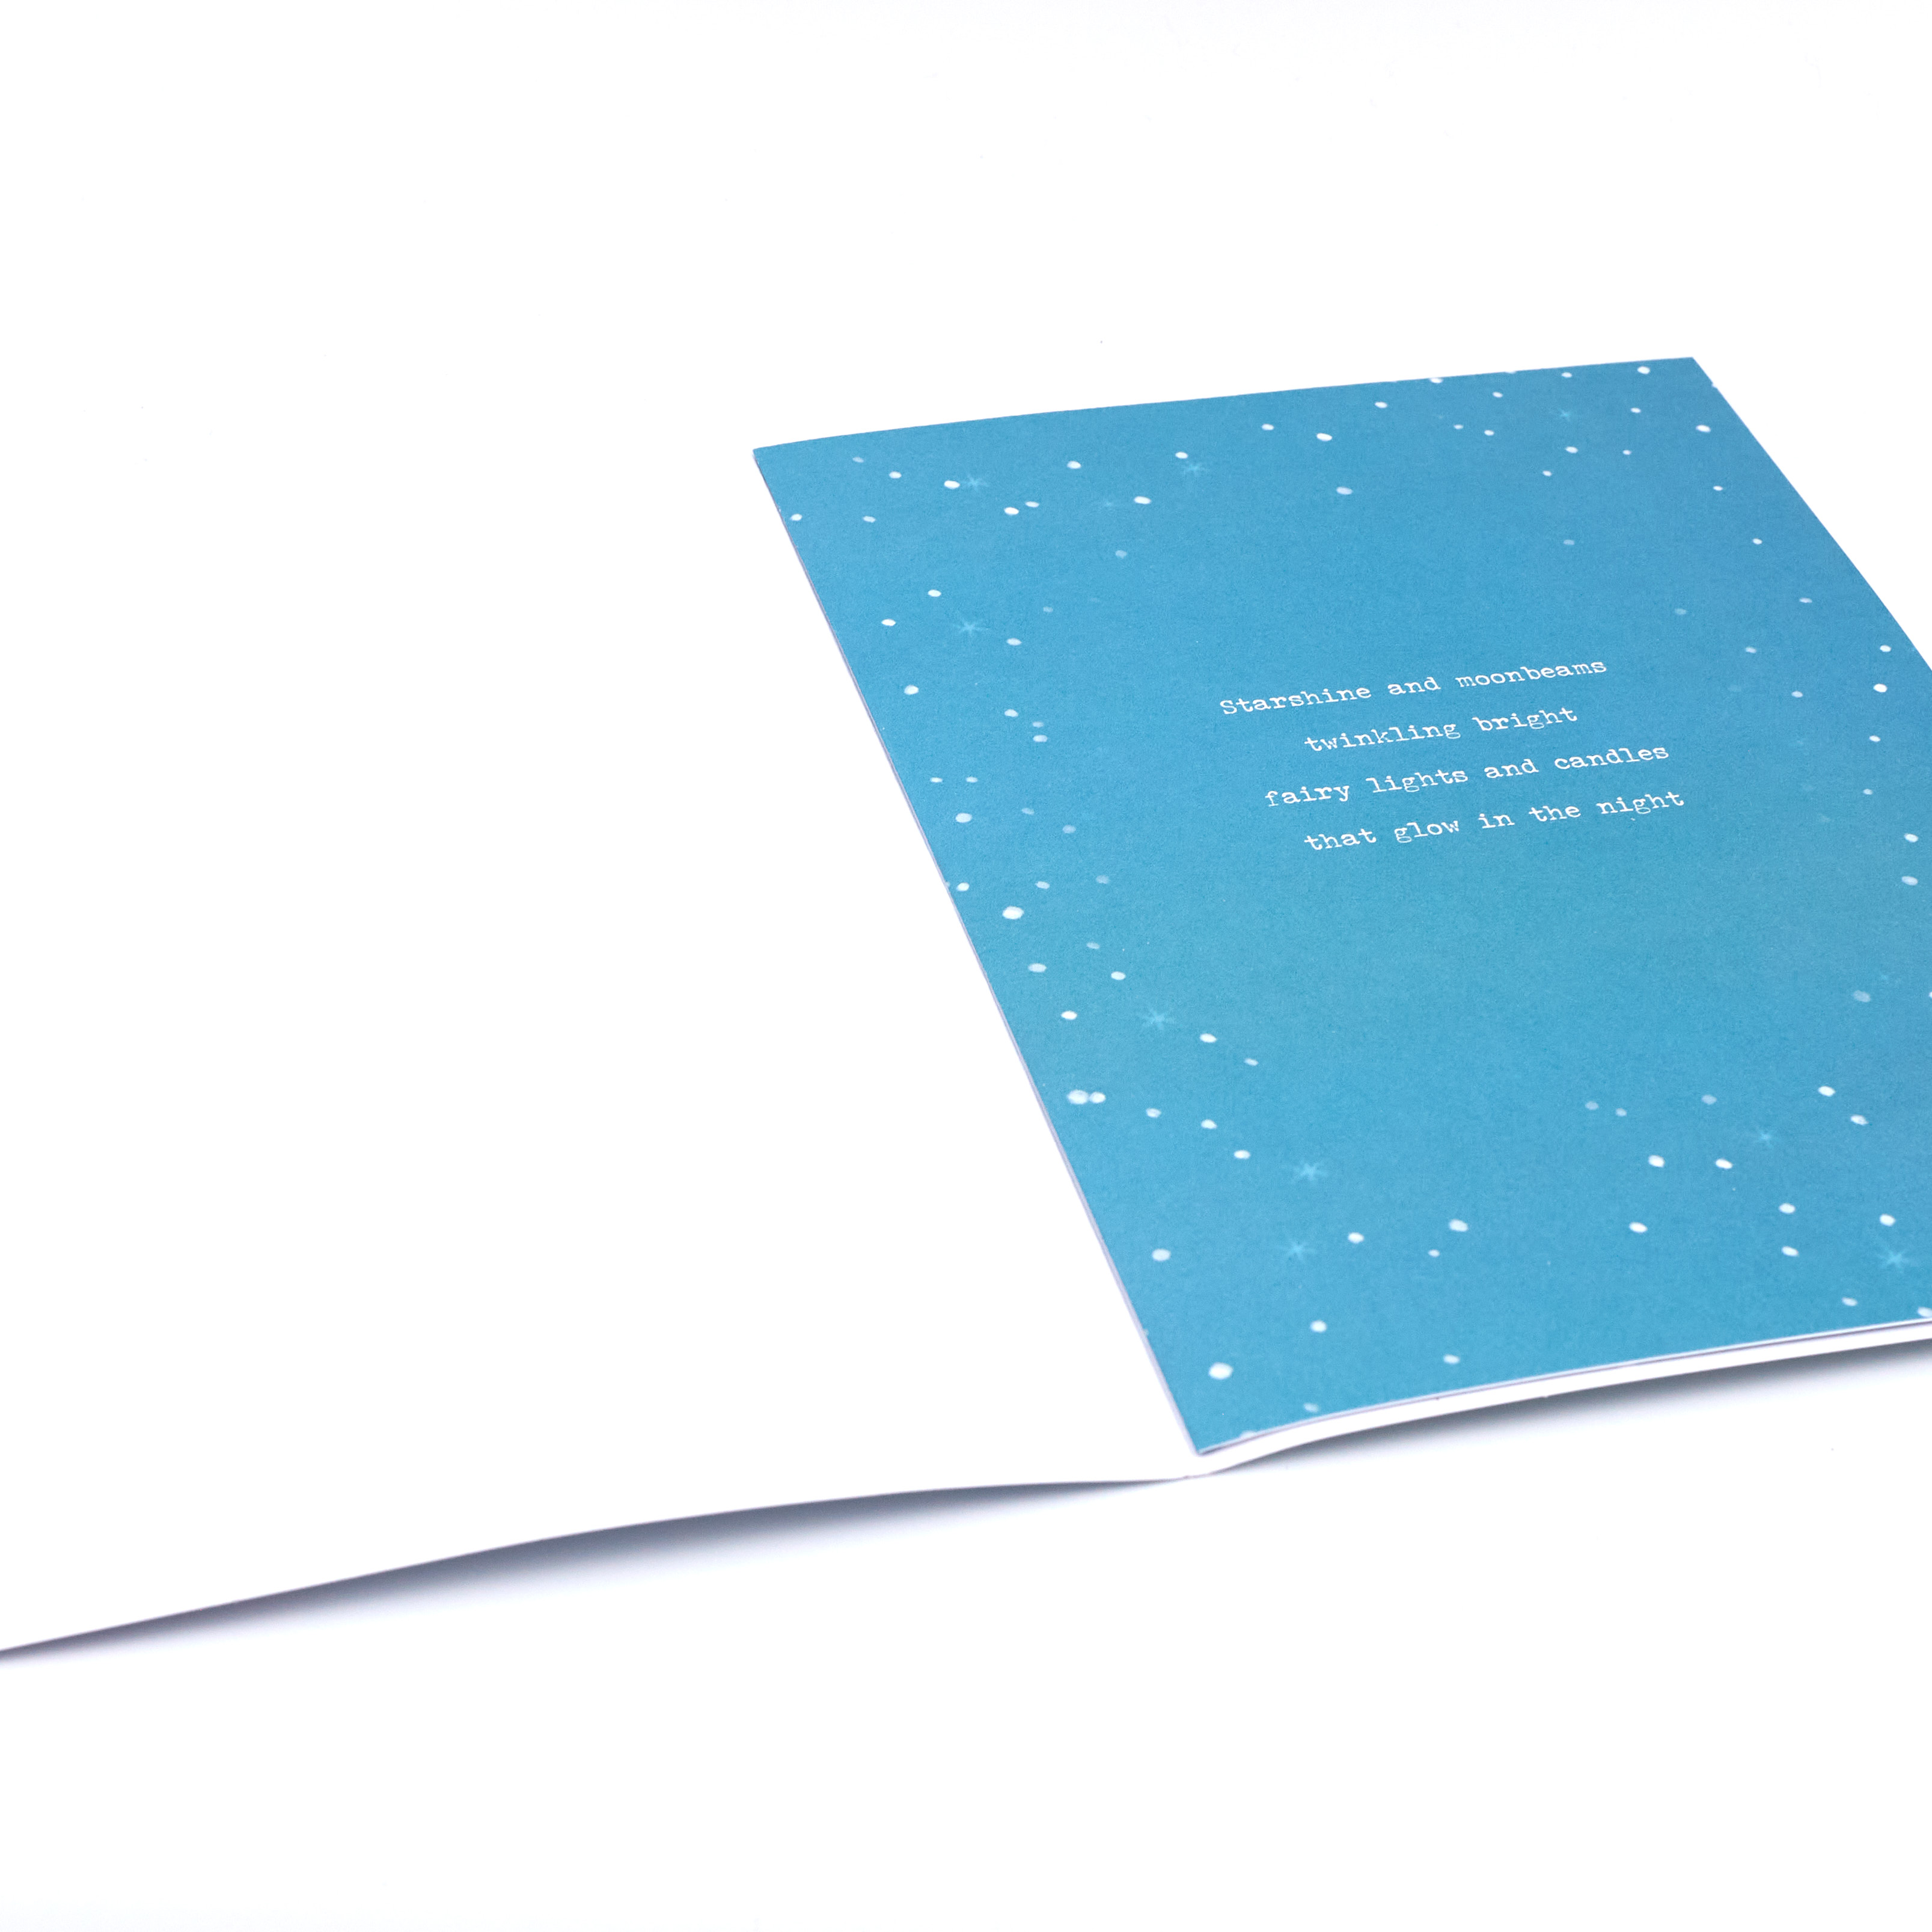 Christmas Card - Special Couple, Cute Penguins In The Snow